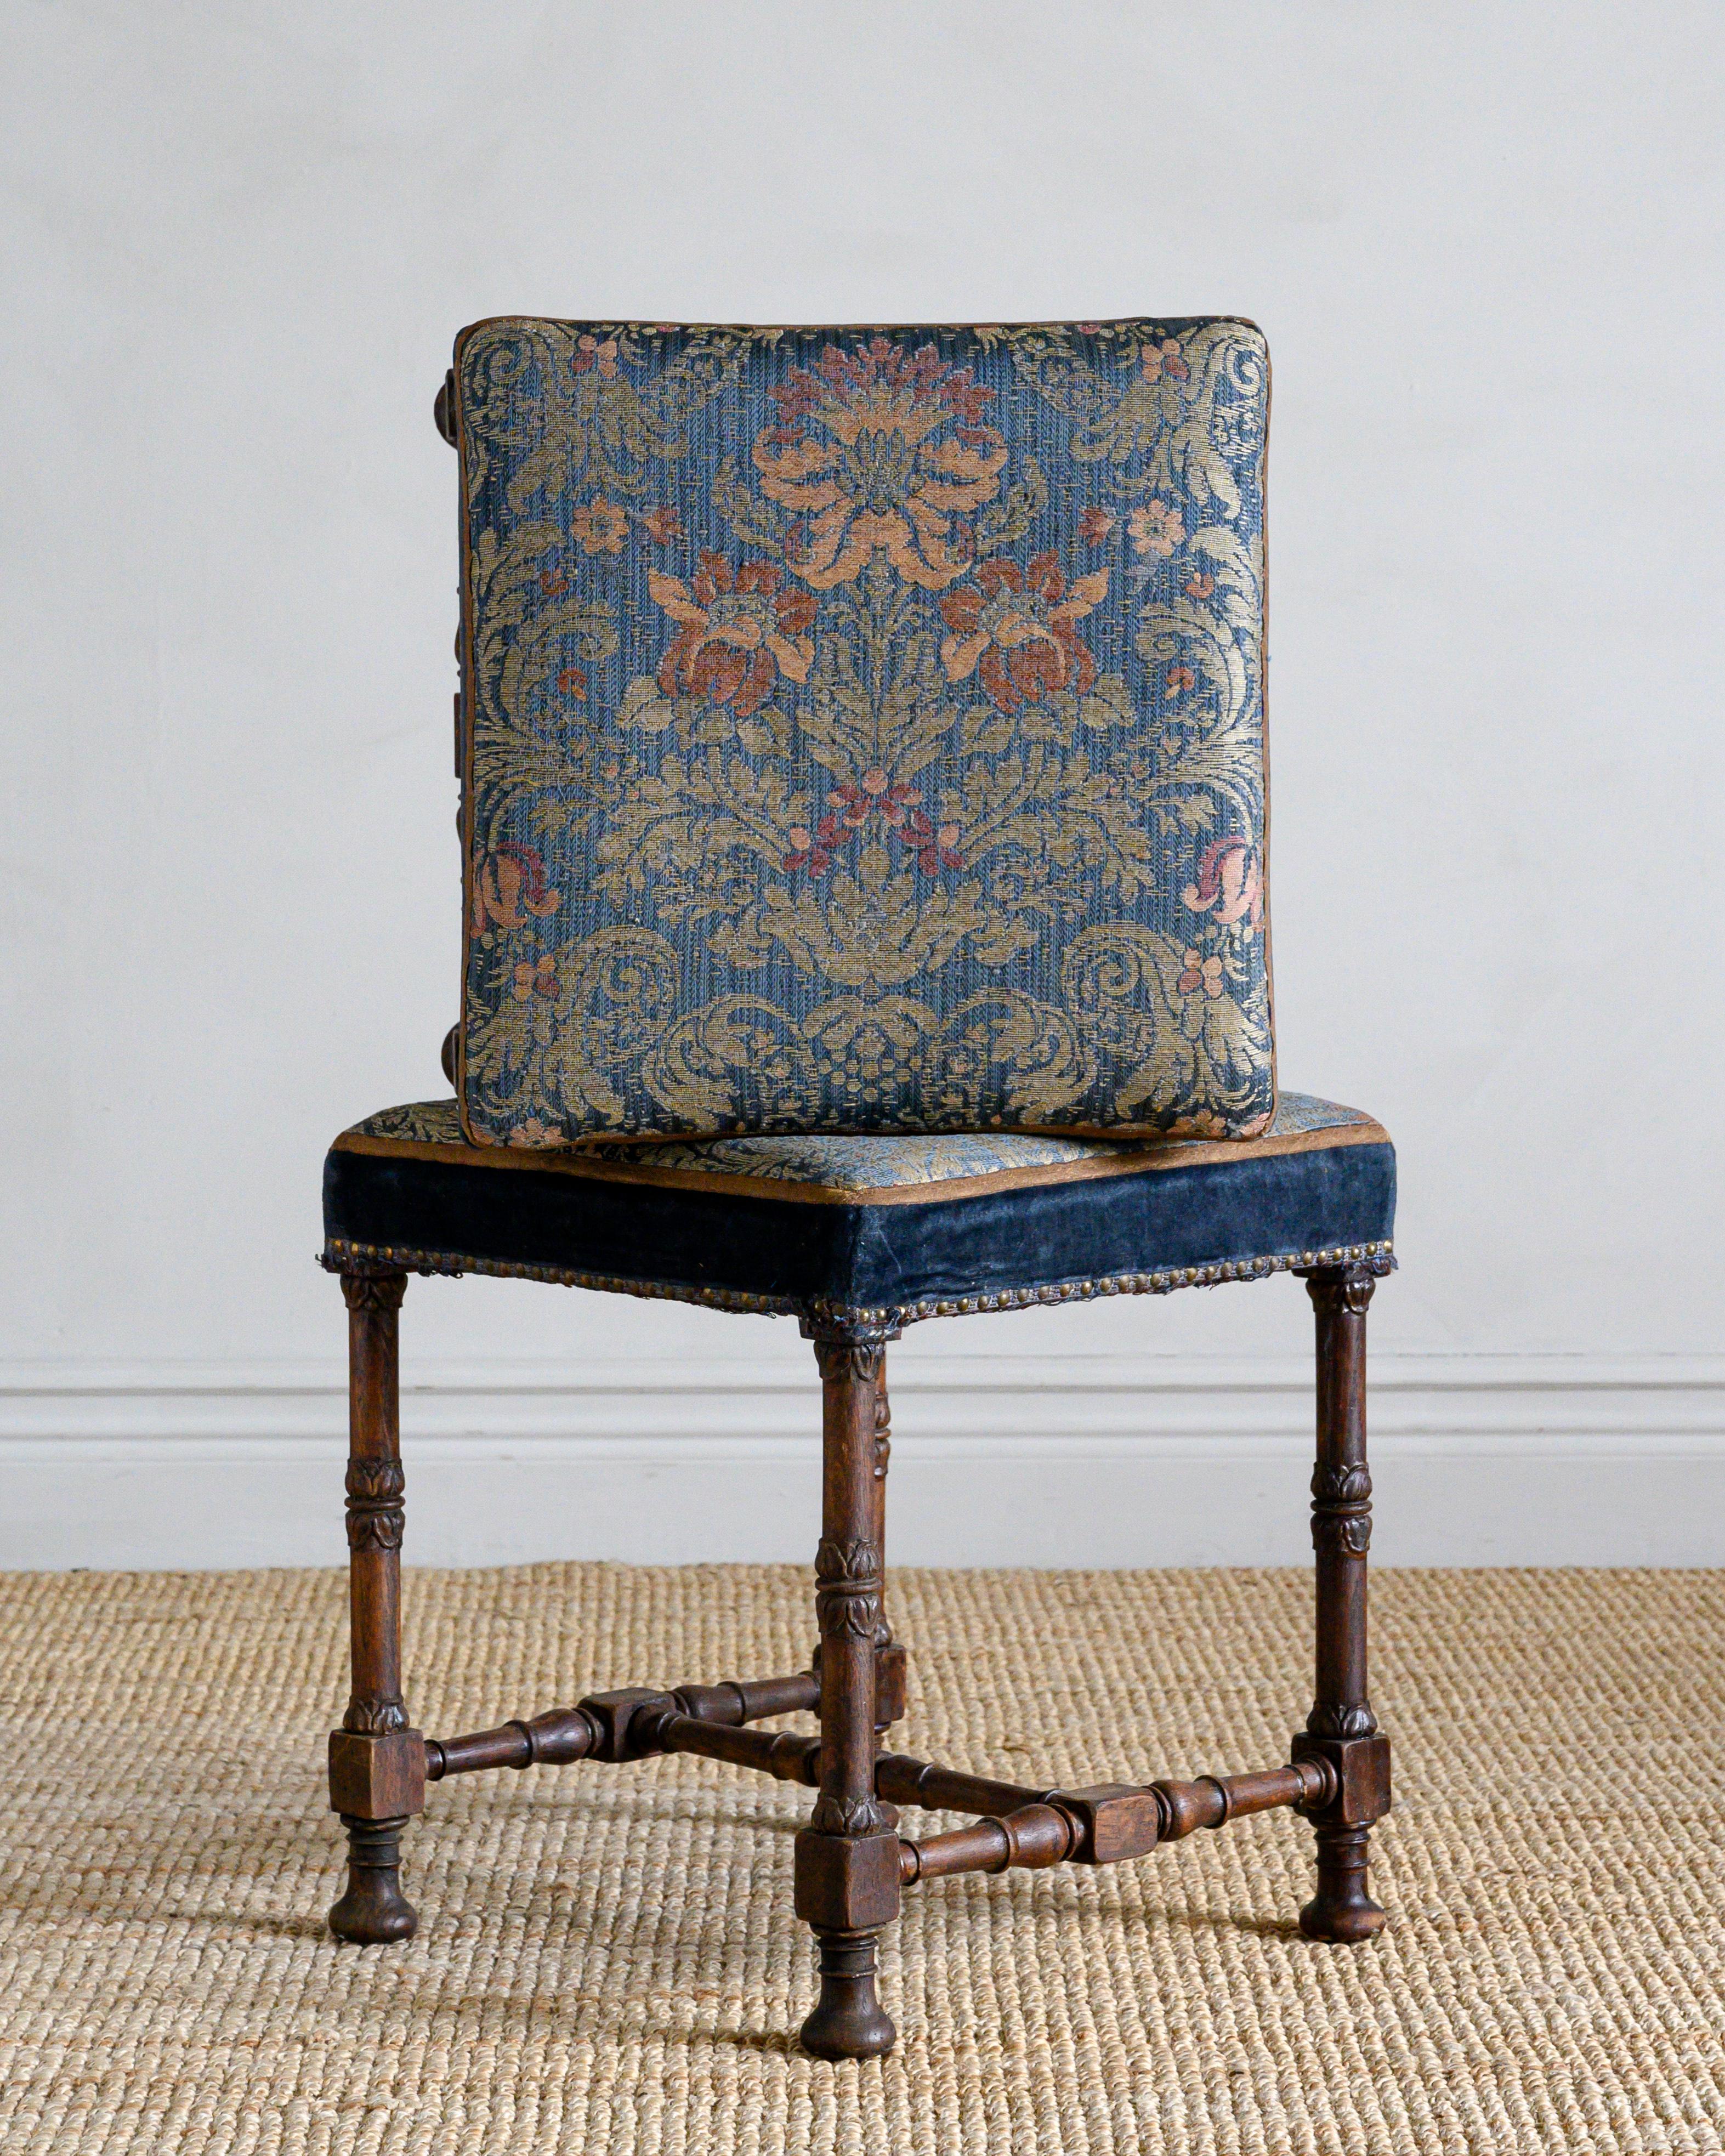 Fine pair of 19th century Jacobean revival stools in their wonderful original upholstery, circa 1880, England.

Good condition with wear consistent with age and use. Structurally good and sturdy. A detailed condition report is available on request.